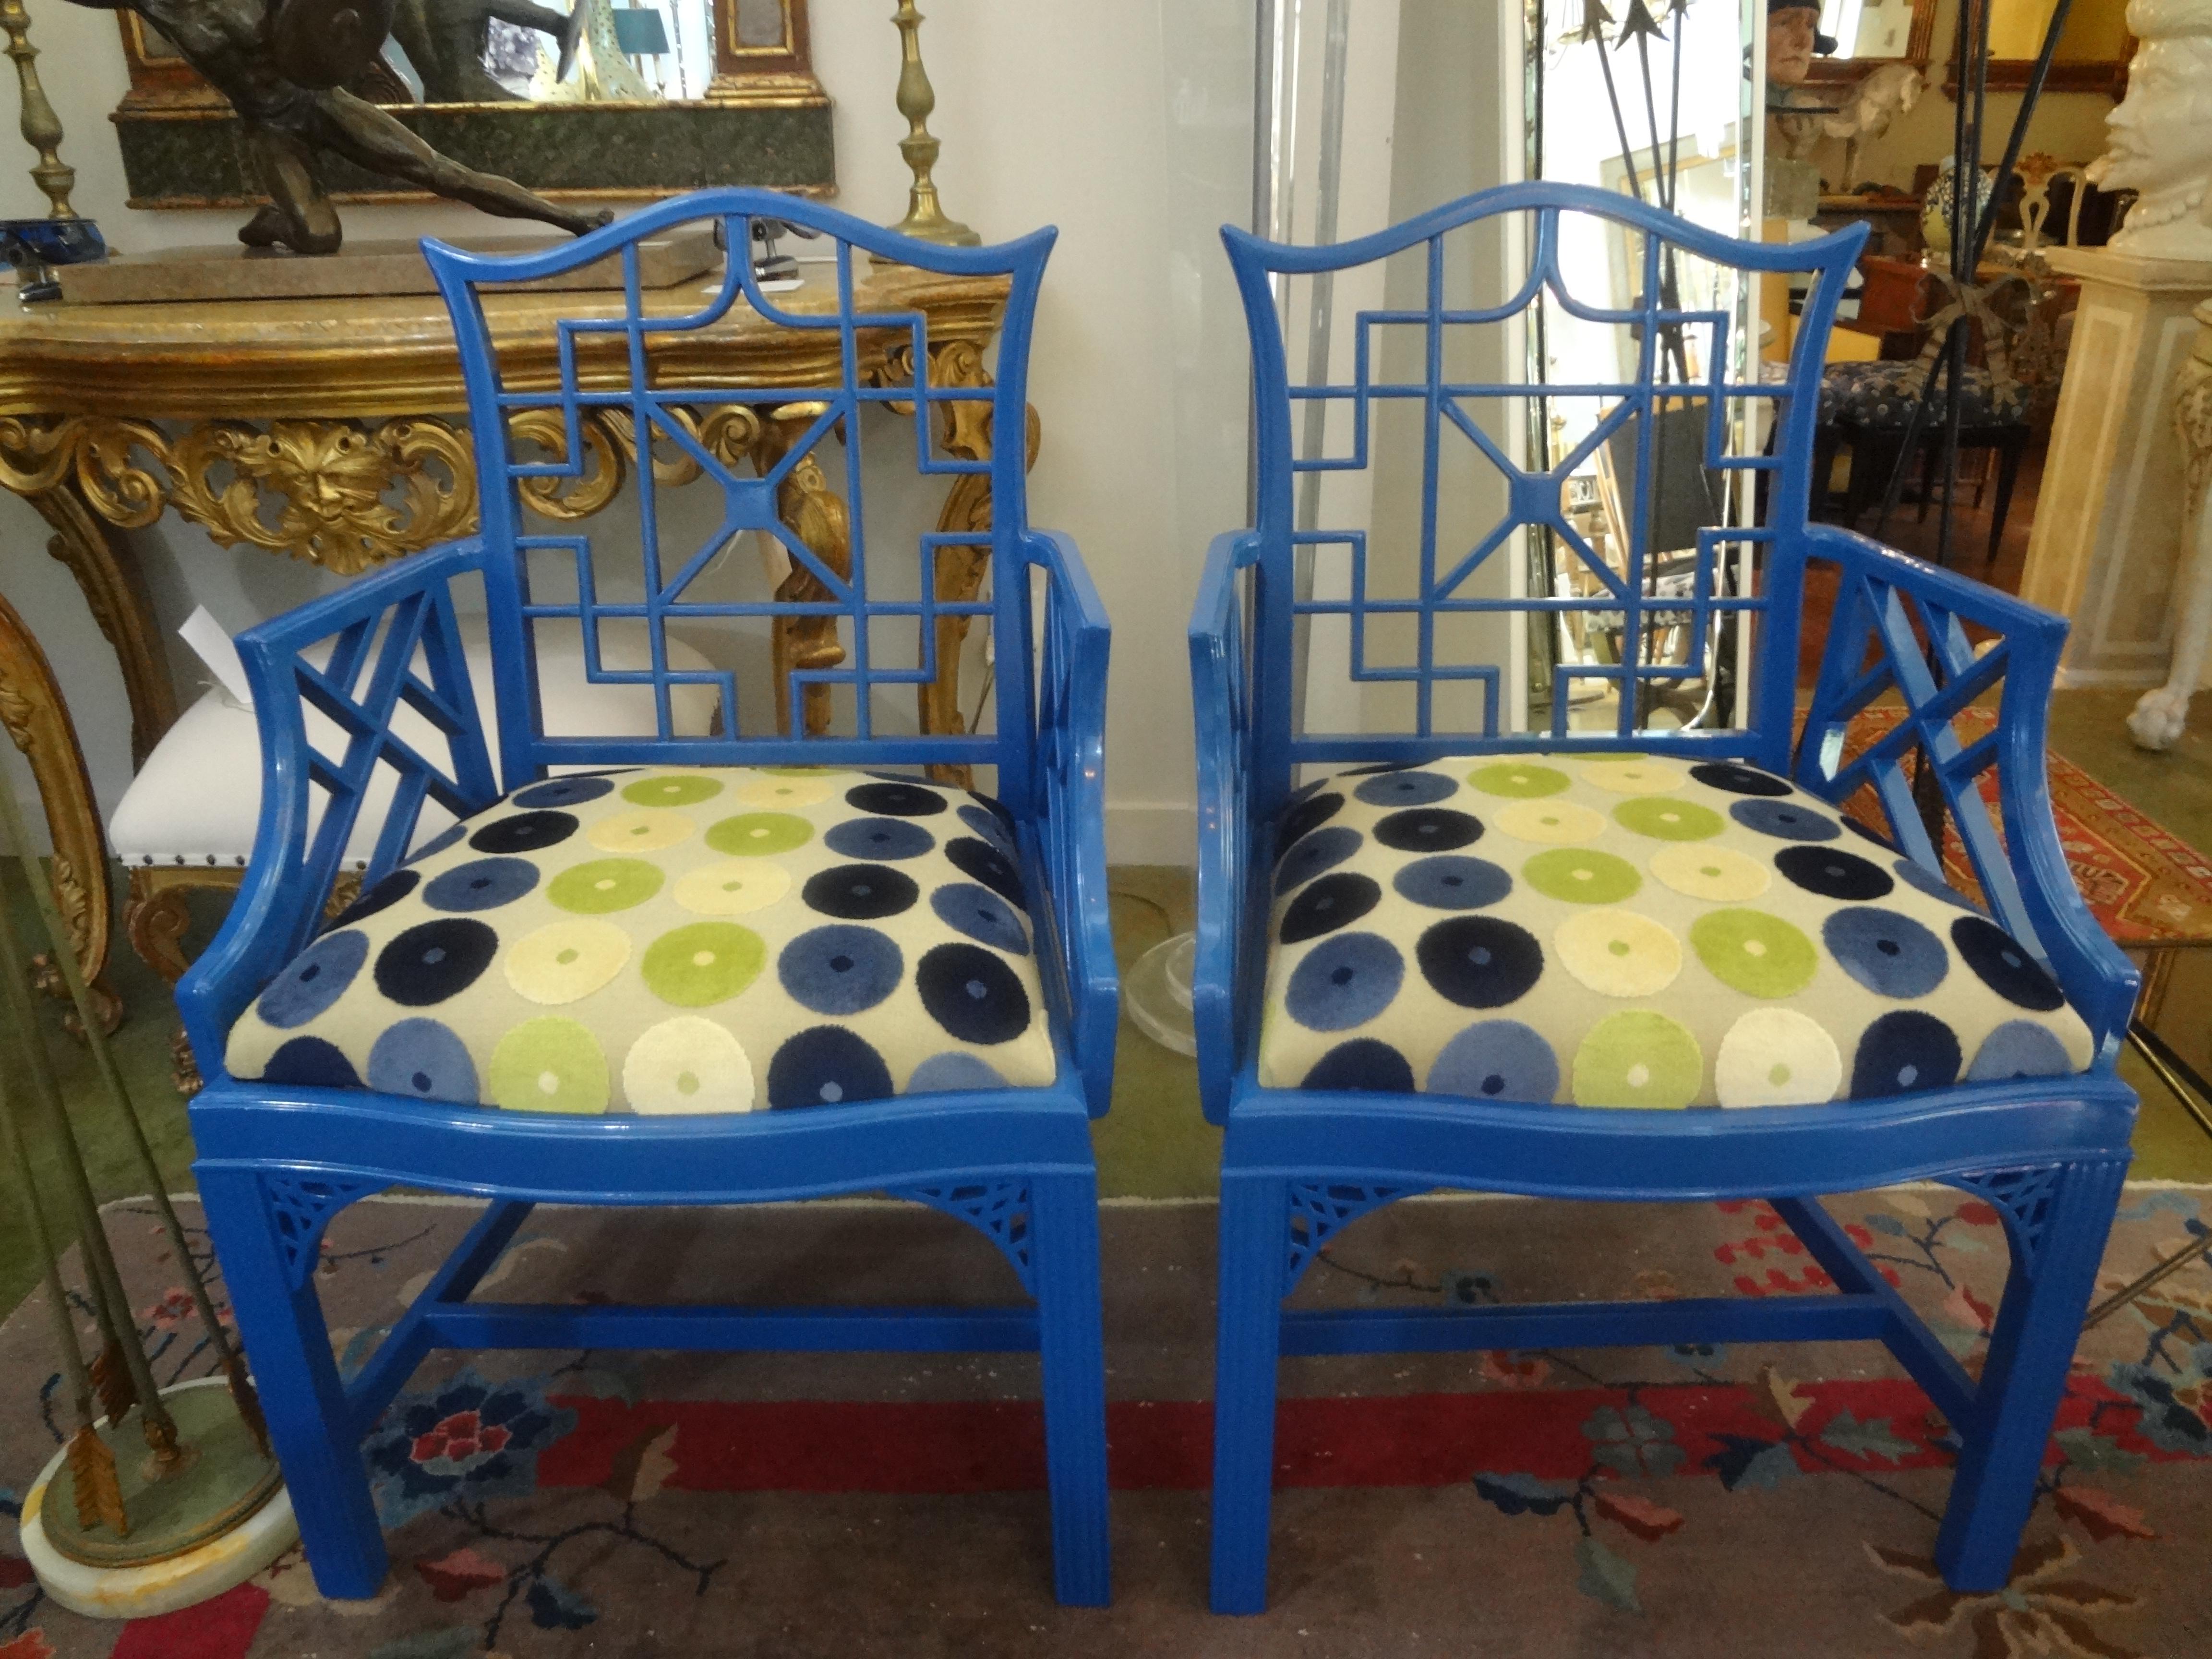 Pair of Chinese Chippendale style chairs.
Pair of Chinese Chippendale style chairs in a gorgeous blue high gloss finish. This pair has beautiful detailing and have been newly upholstered in a beautiful geometric cut velvet fabric. These armchairs